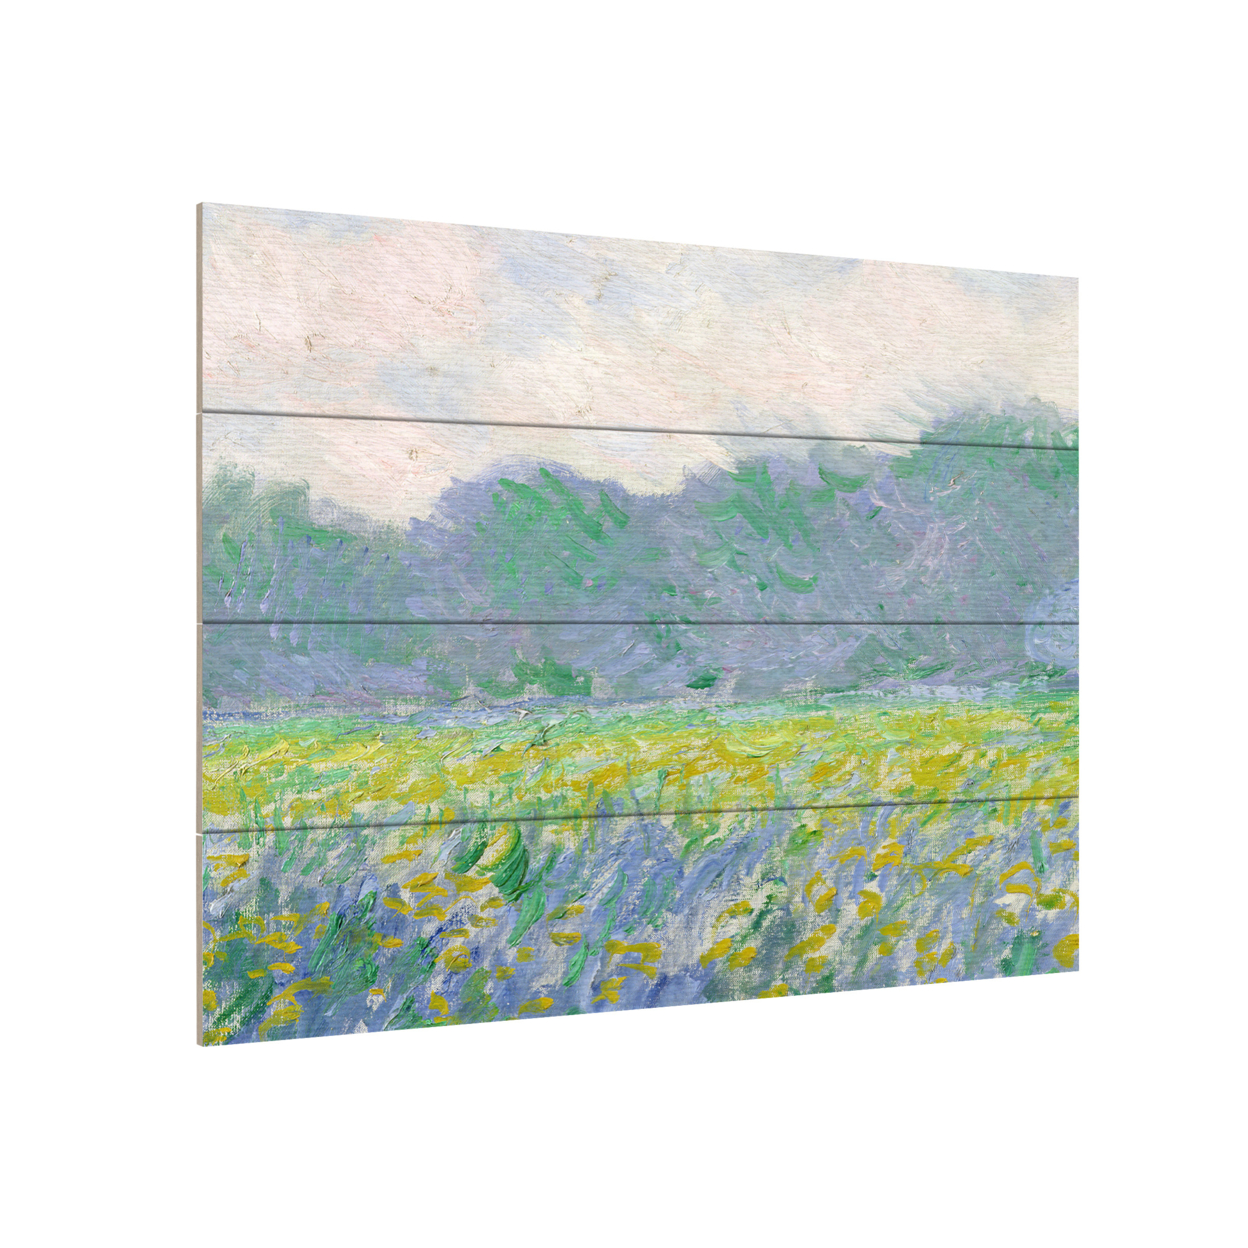 Wall Art 12 X 16 Inches Titled Field Of Yellow Irises Ready To Hang Printed On Wooden Planks